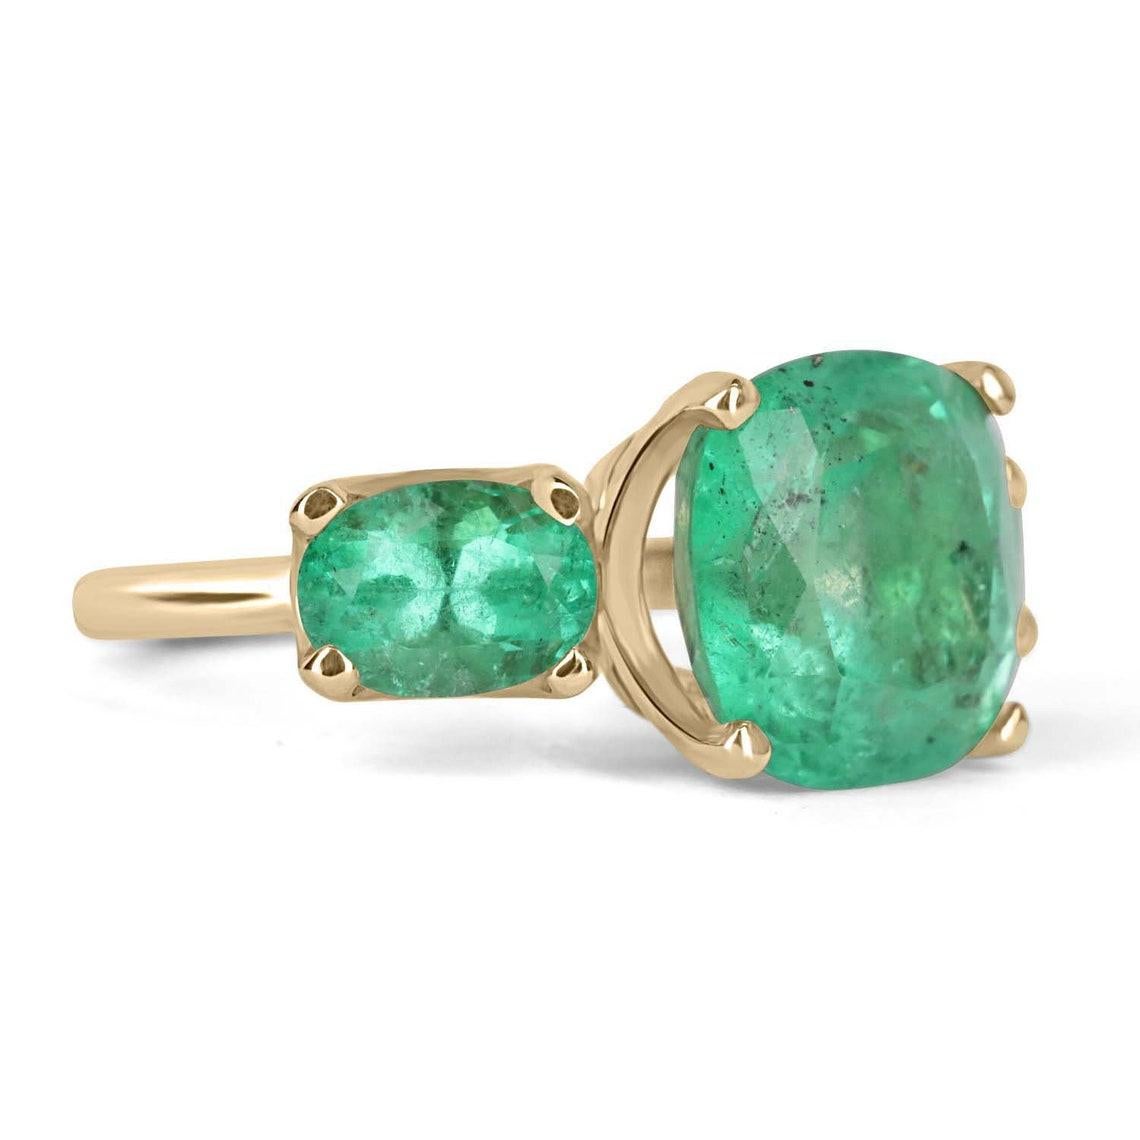 A Colombian emerald three stone ring. This bespoke ring design is crafted in gleaming 14K yellow gold, this ring features a 6.55-carat cushion cut in its center. Oval emeralds are flanked on the side creating an array of green. Simply gorgeous and